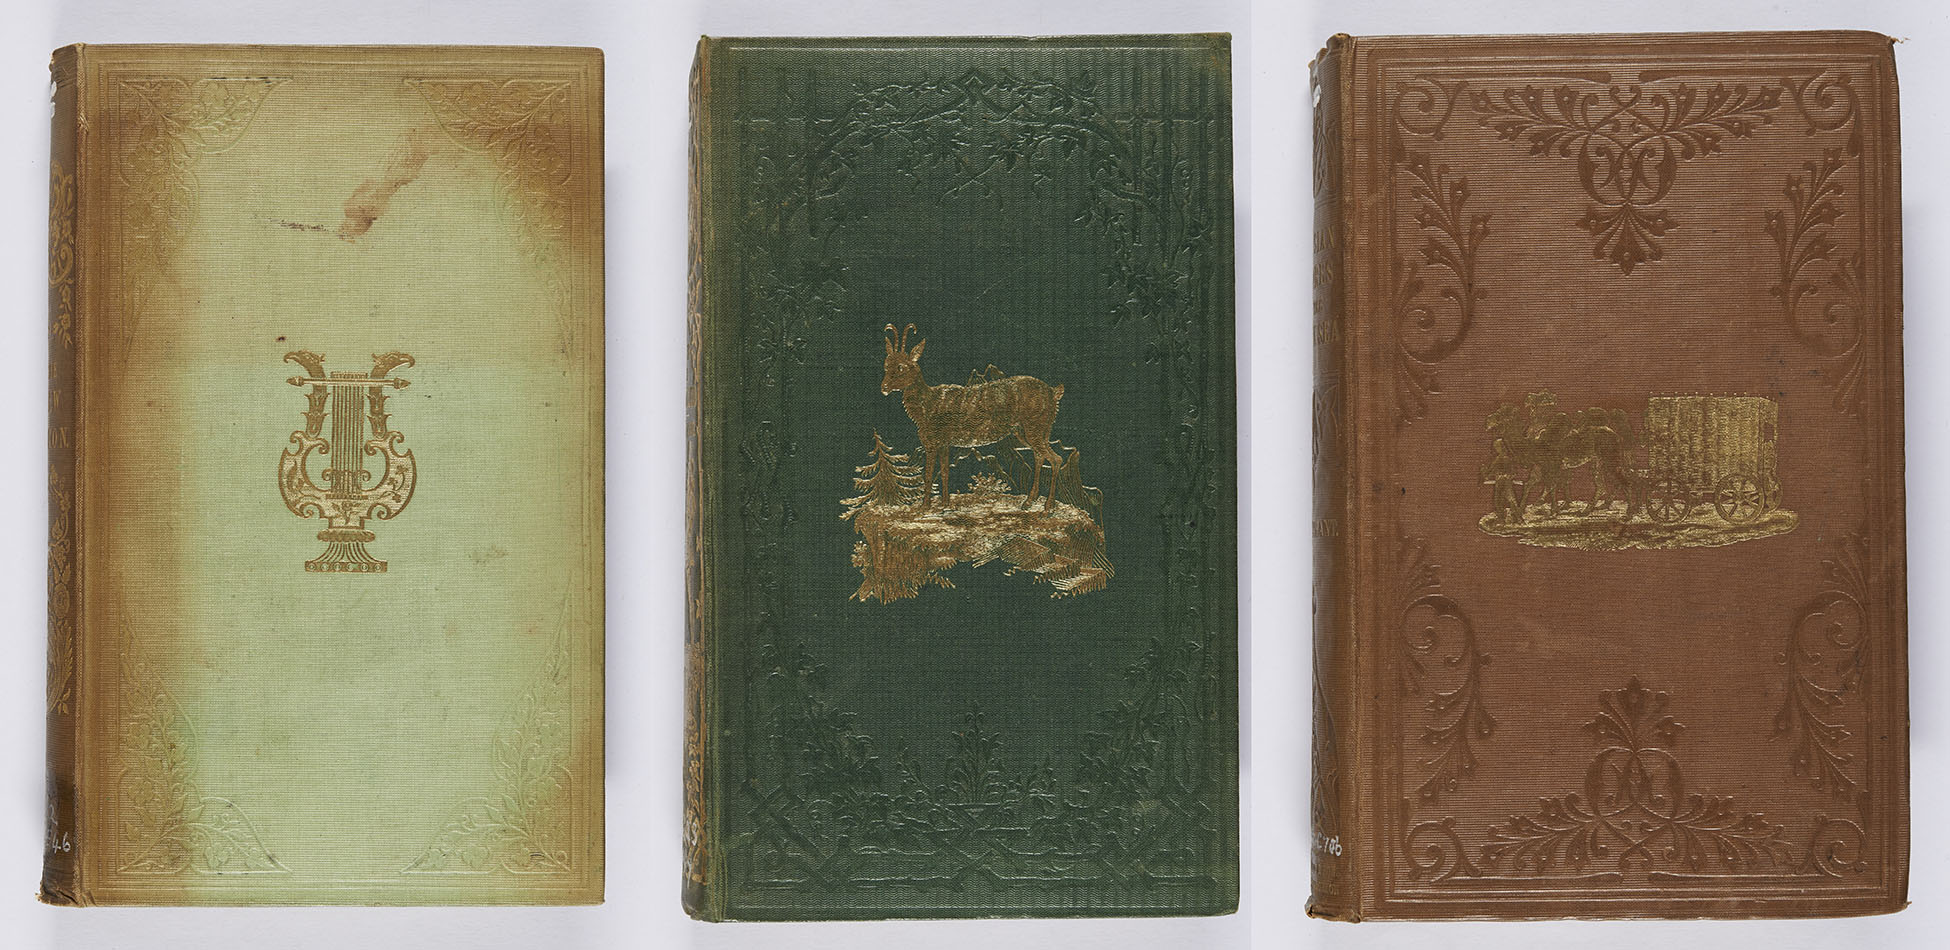 Further examples of bindings using a combination of blind and gilt blocking. The new Timon (London, Henry Colburn, 1846 ; bound by Westleys & Co.), s PR4922.N4E46 ; Baptist W. Noel, Notes of a tour in Switzerland (London: James Nisbet and Co., 1848 ; bound by Westleys & Clark), s DQ23.N7 ; Laurence Oliphant, The Russian shores of the Black Sea (Edinburgh and London: William Blackwood and Sons, 1853 ; bound by Edmonds & Remnants), s DK511.C7O6. 